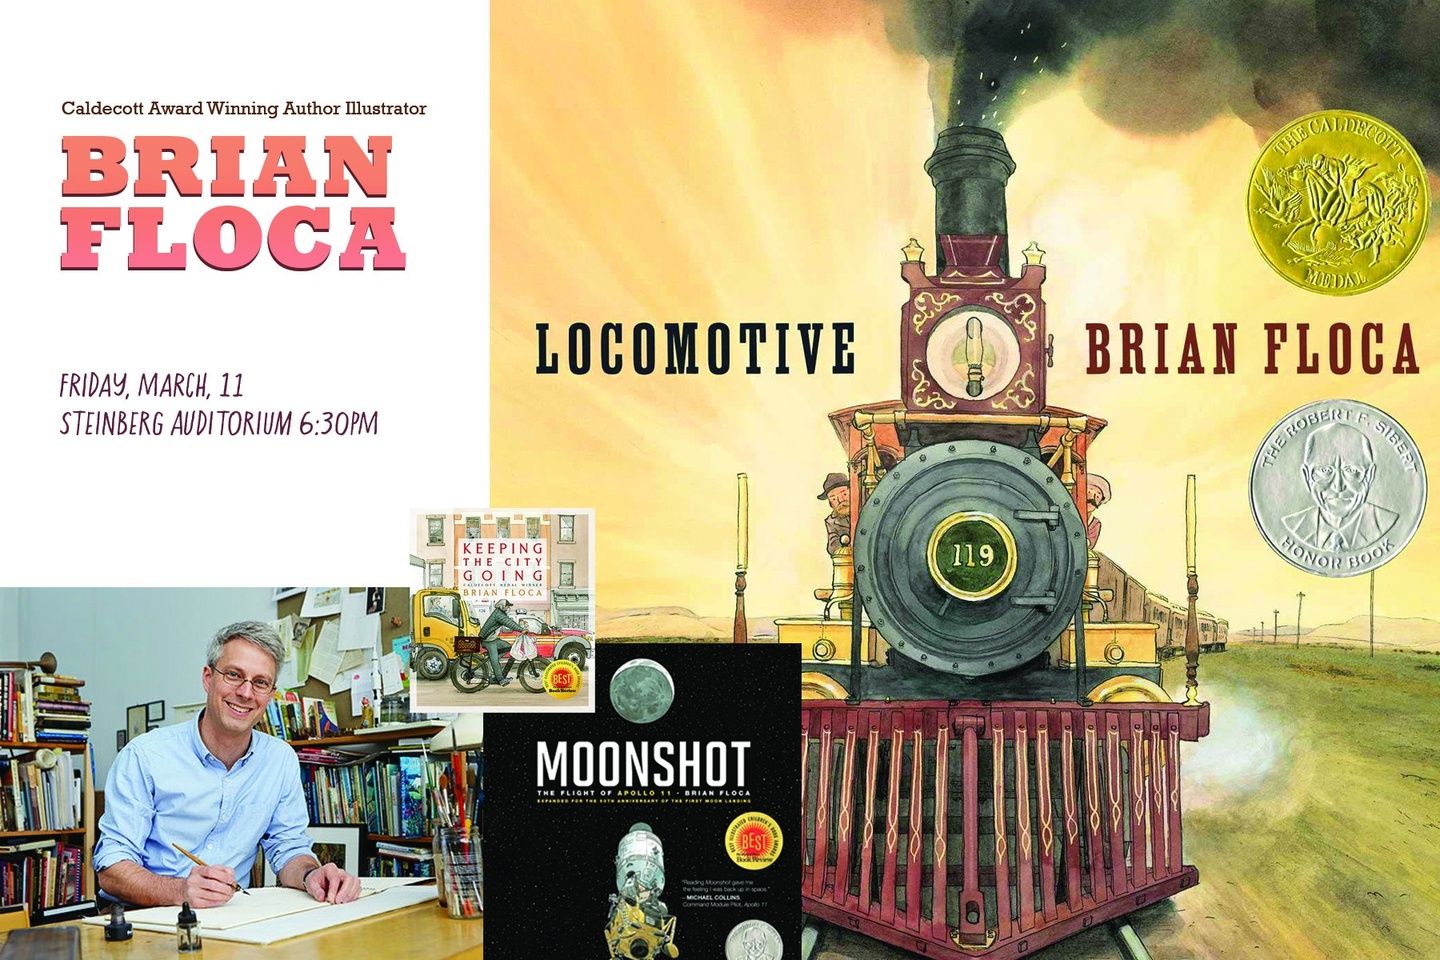 Lead graphic featuring a photo of Brian Floca, a few of his illustrated book covers, and his name and lecture details.